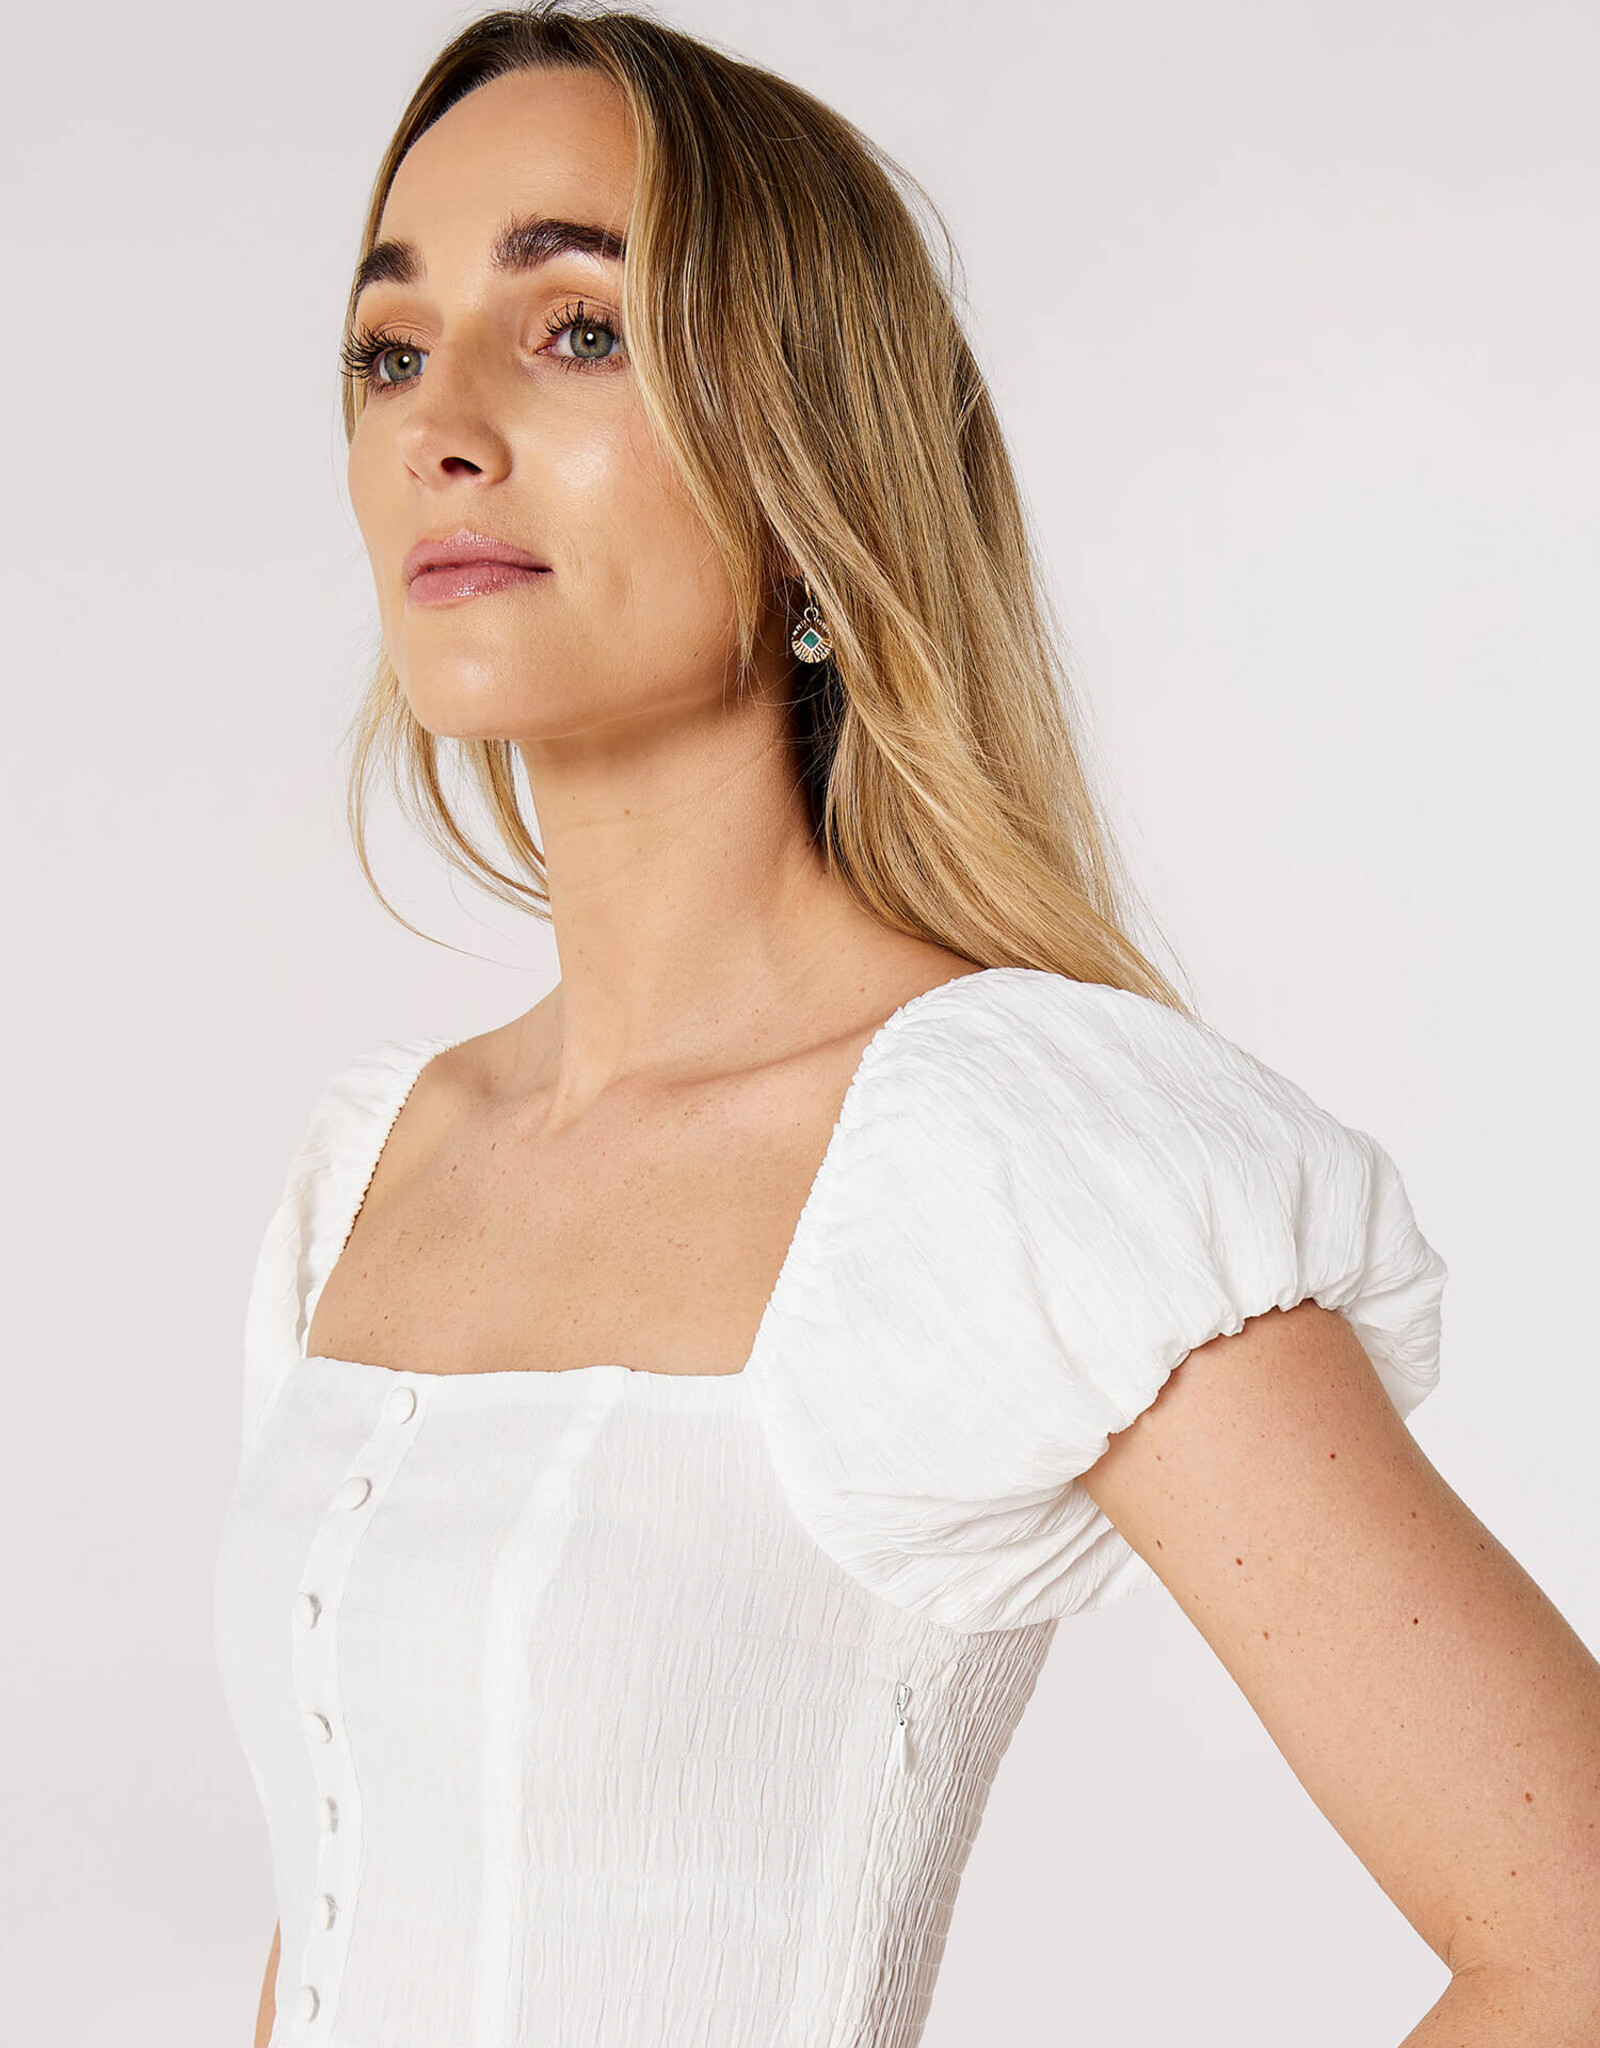 Apricot Self Check Tiered Midaxi Dress